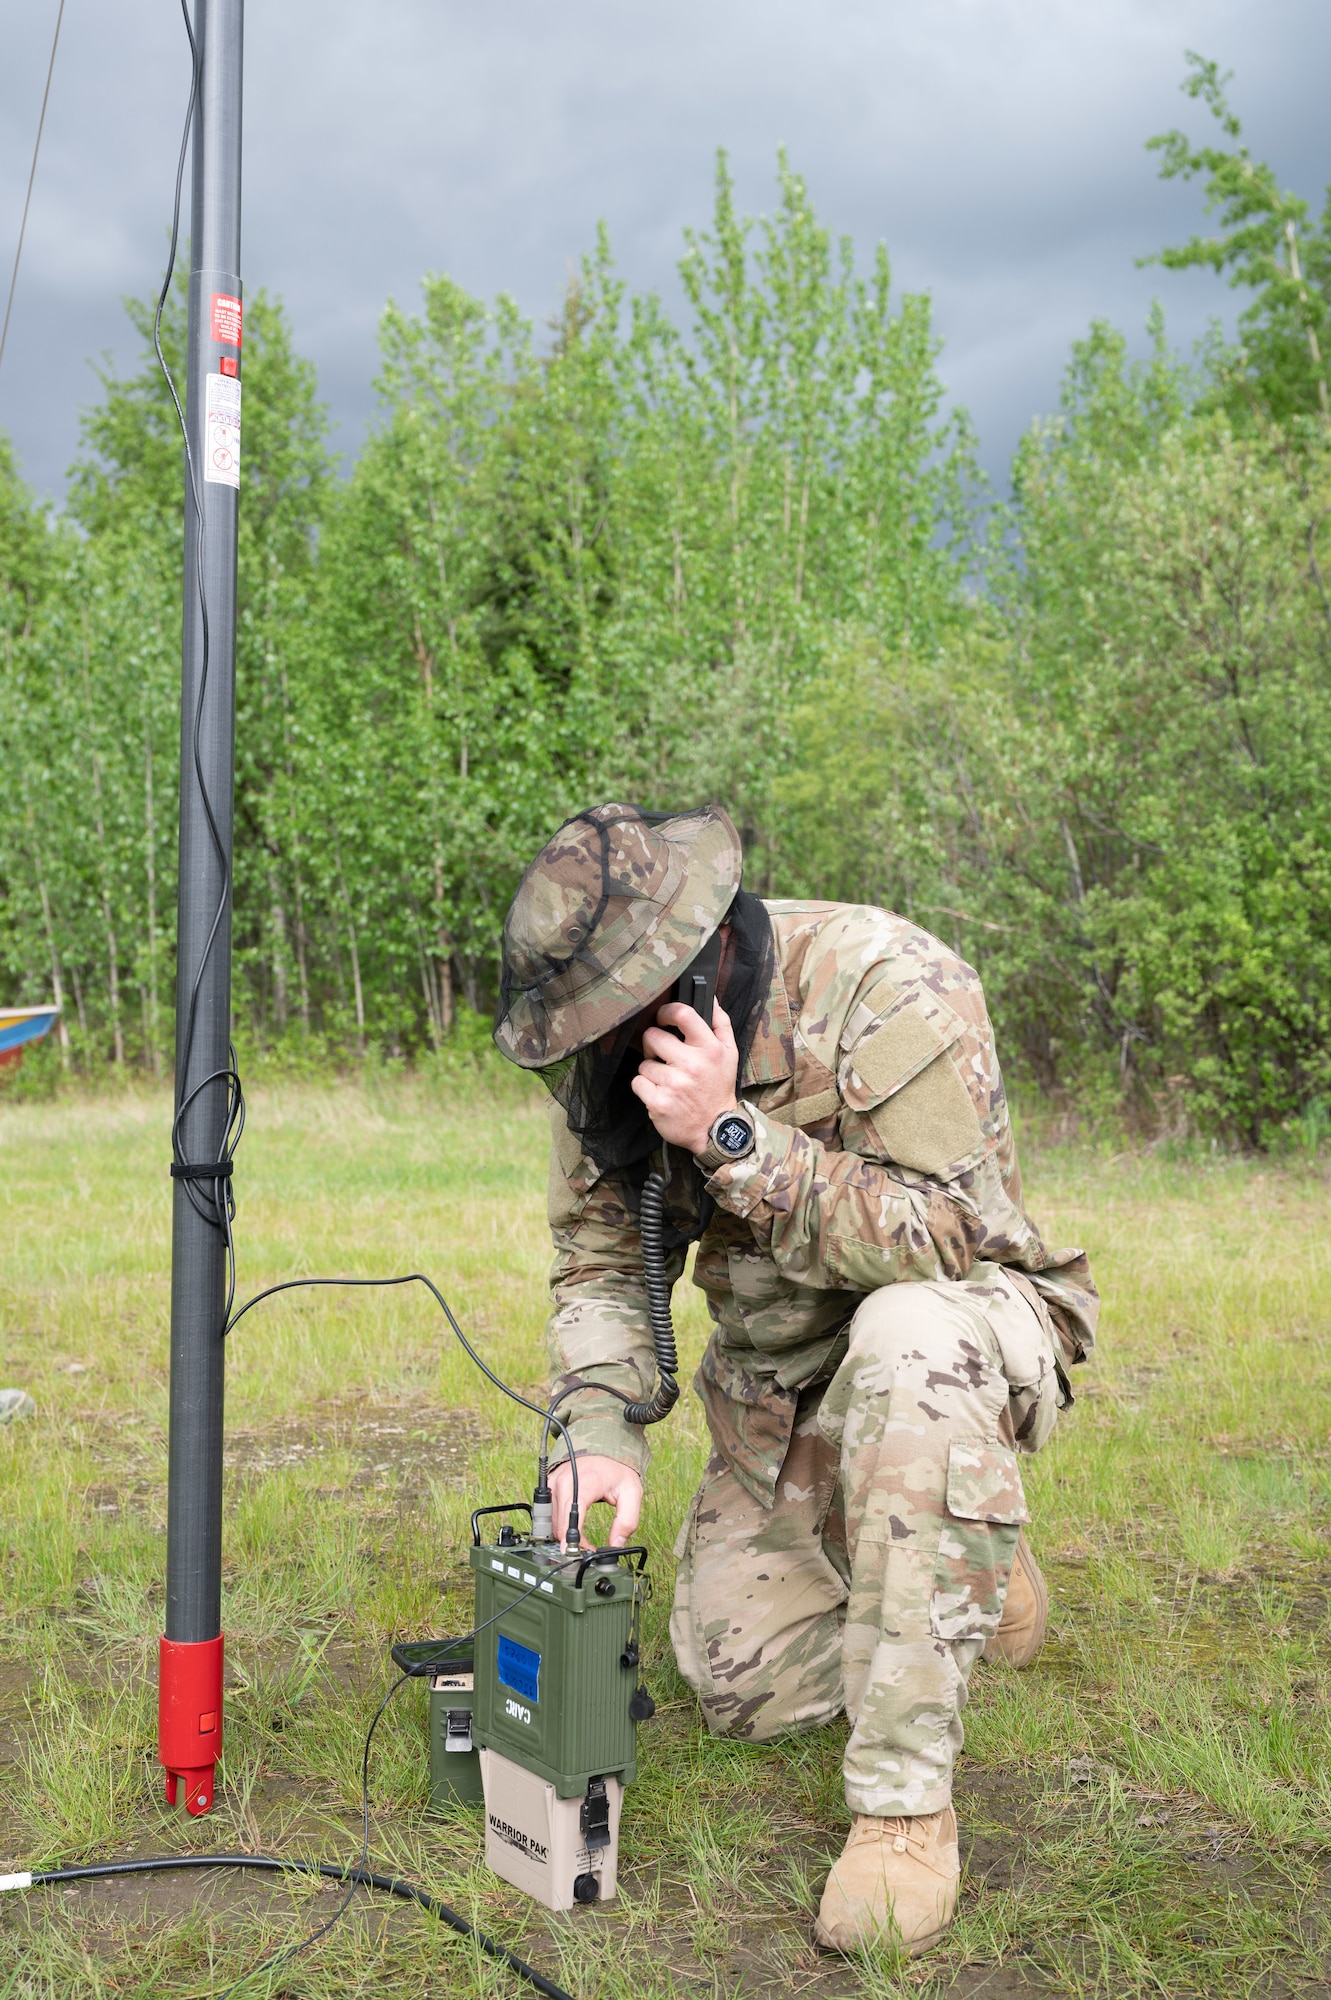 U.S. Air Force Tech Sgt. Collin Lopes, a radio frequency transmission systems specialist, 35th Combat Communications Squadron, Tinker Air Force Base, Oklahoma remotely establishes communication from Coldfoot, Alaska with counterparts at Tinker AFB and in British Columbia as part of Exercise AGILE BLIZZARD-UNIFIED VISION Phase II on June 11, 2023. Lopes wore a net to protect his face from mosquitos which were just one of the environmental factors that made working above the arctic circle challenging. (U.S. Air Force photo by Staff Sgt. Dana Tourtellotte)